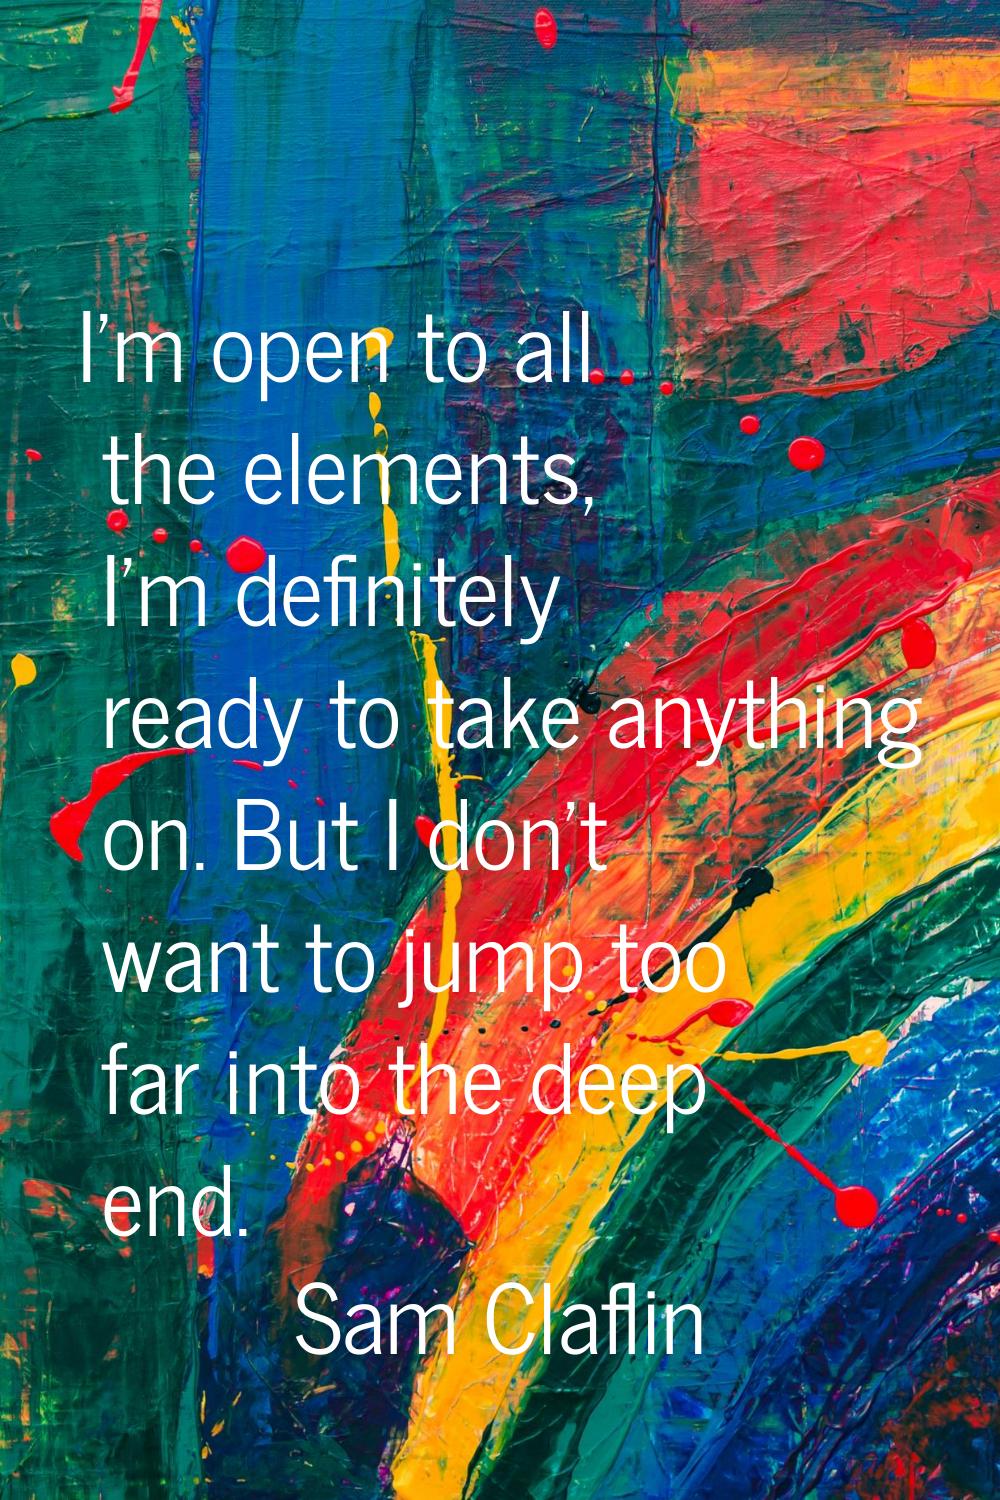 I'm open to all the elements, I'm definitely ready to take anything on. But I don't want to jump to